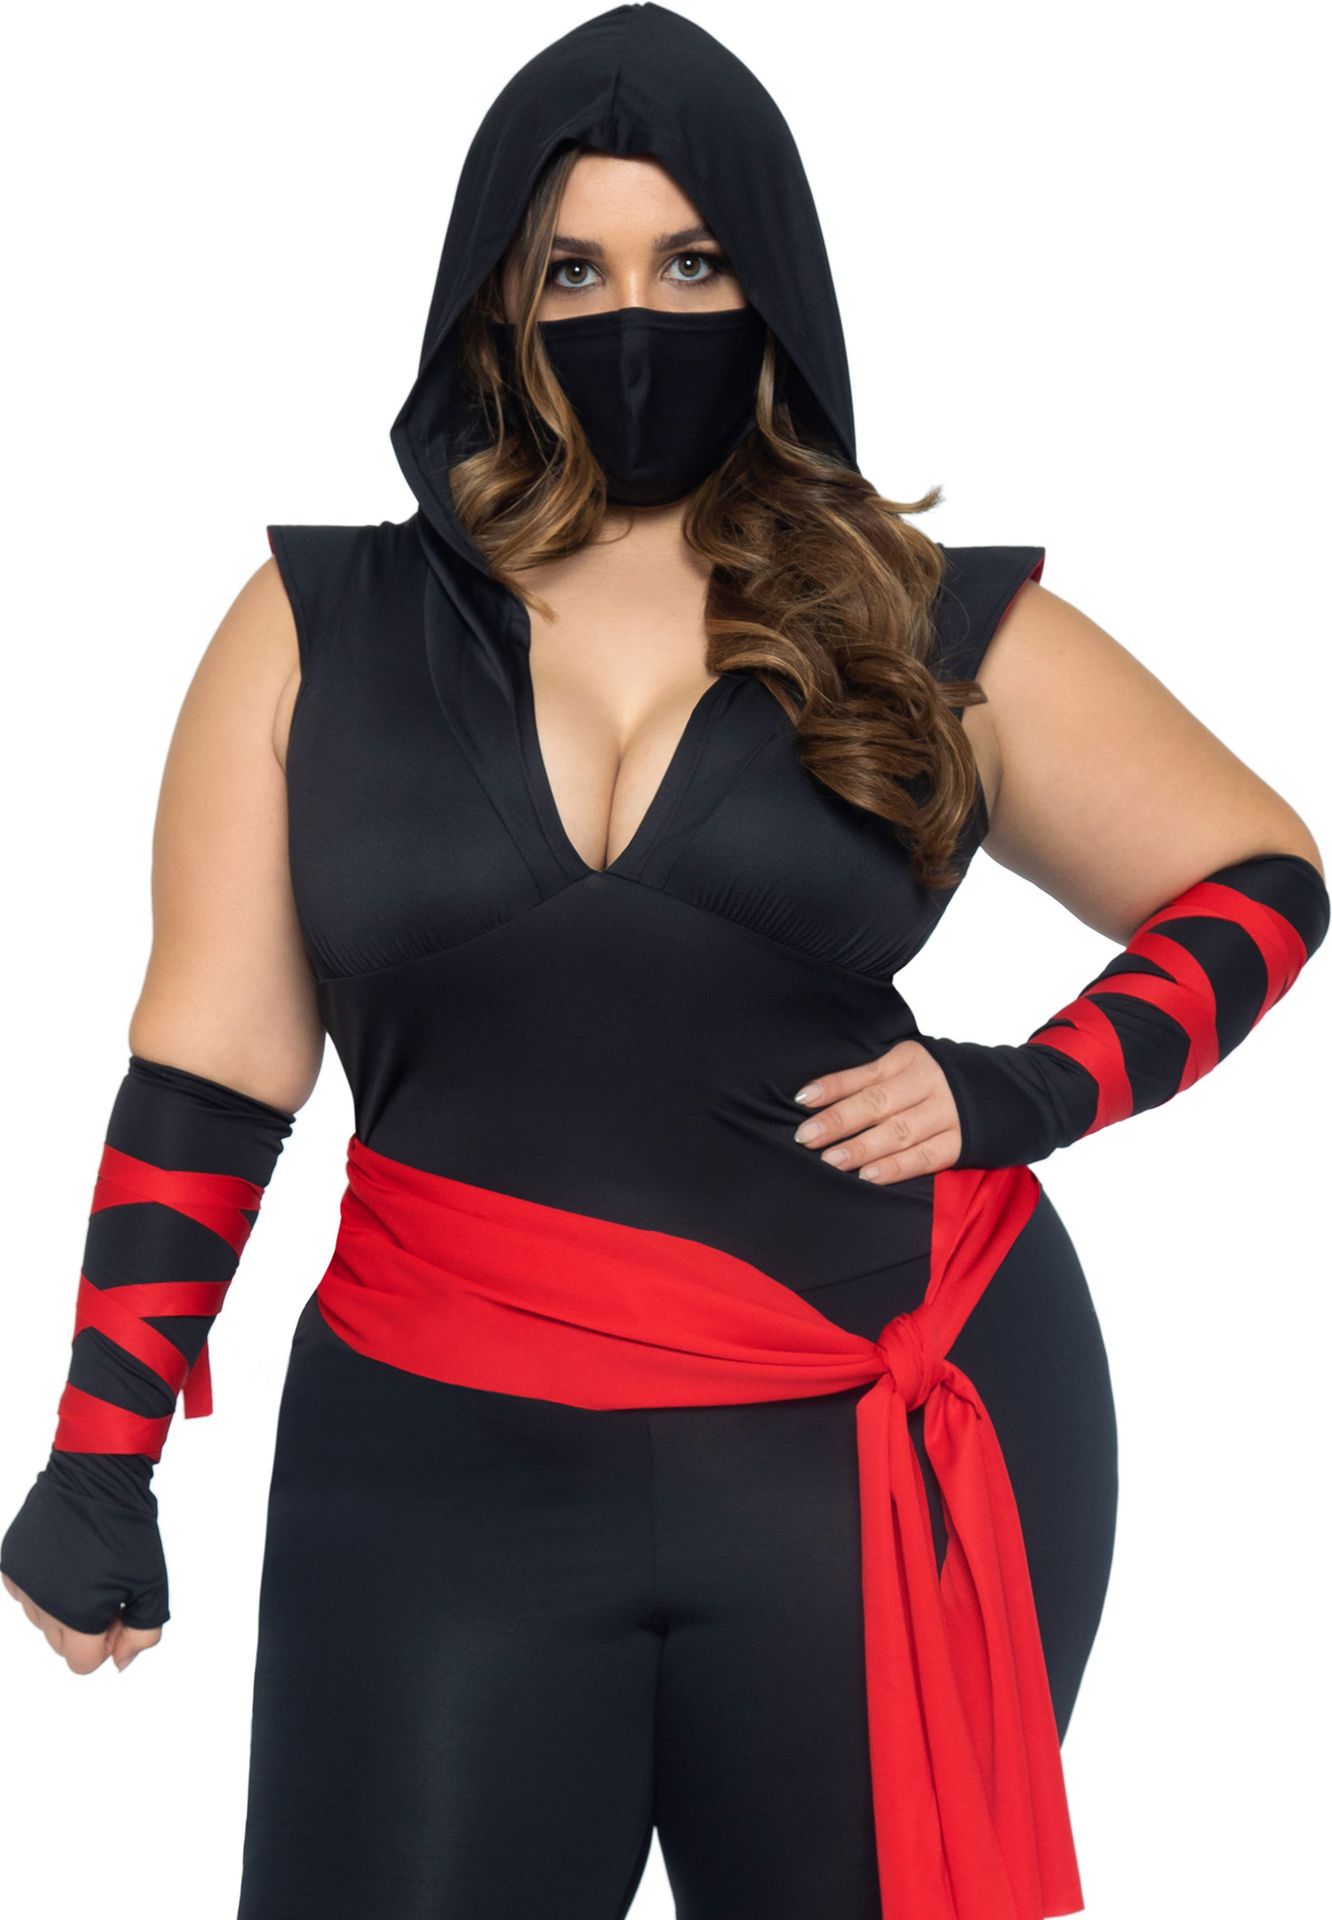 Plus size ninja outfit